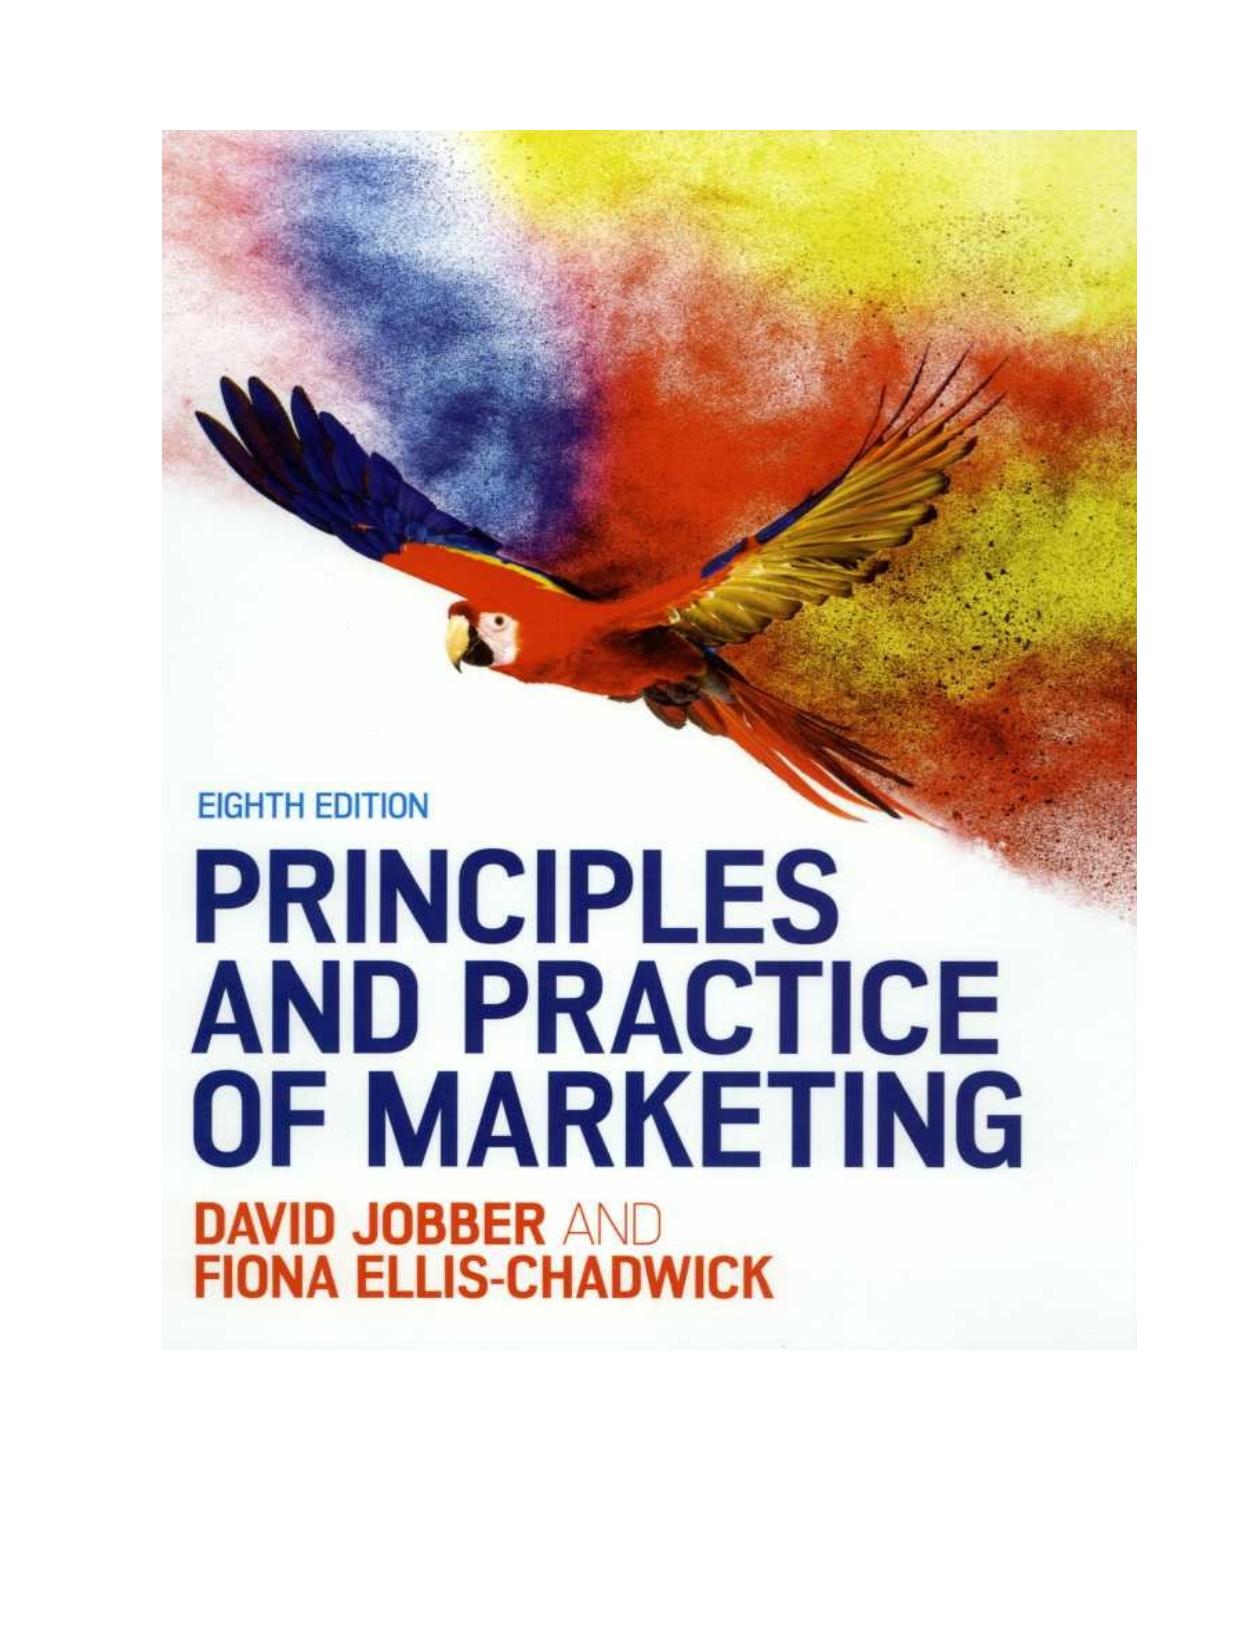 PRINCIPLES AND PRACTICE OF MARKETING